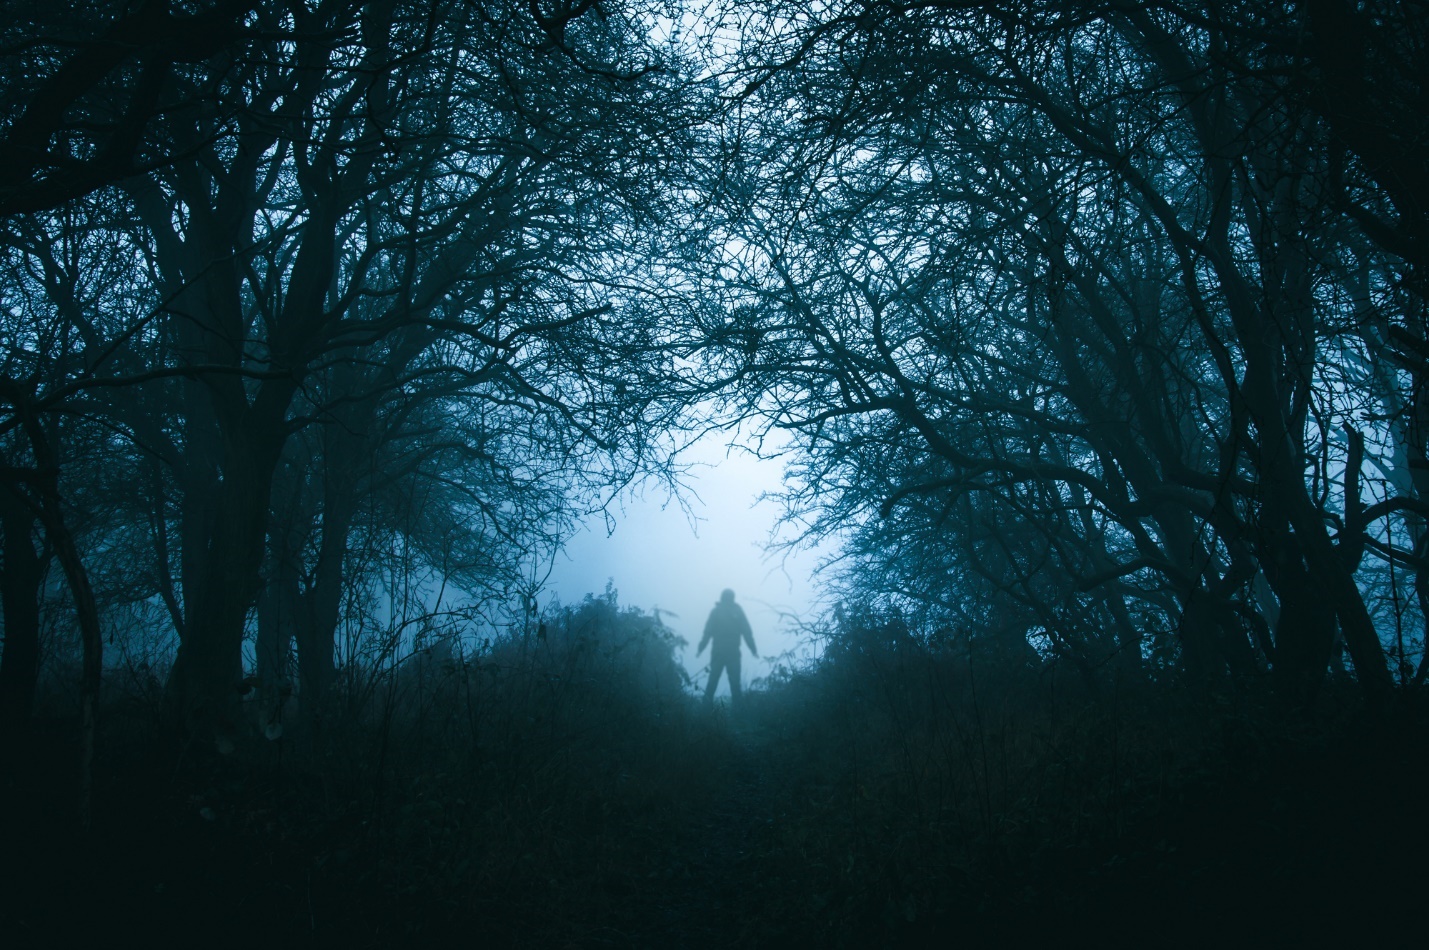 A person standing in a dark forest

Description automatically generated with low confidence